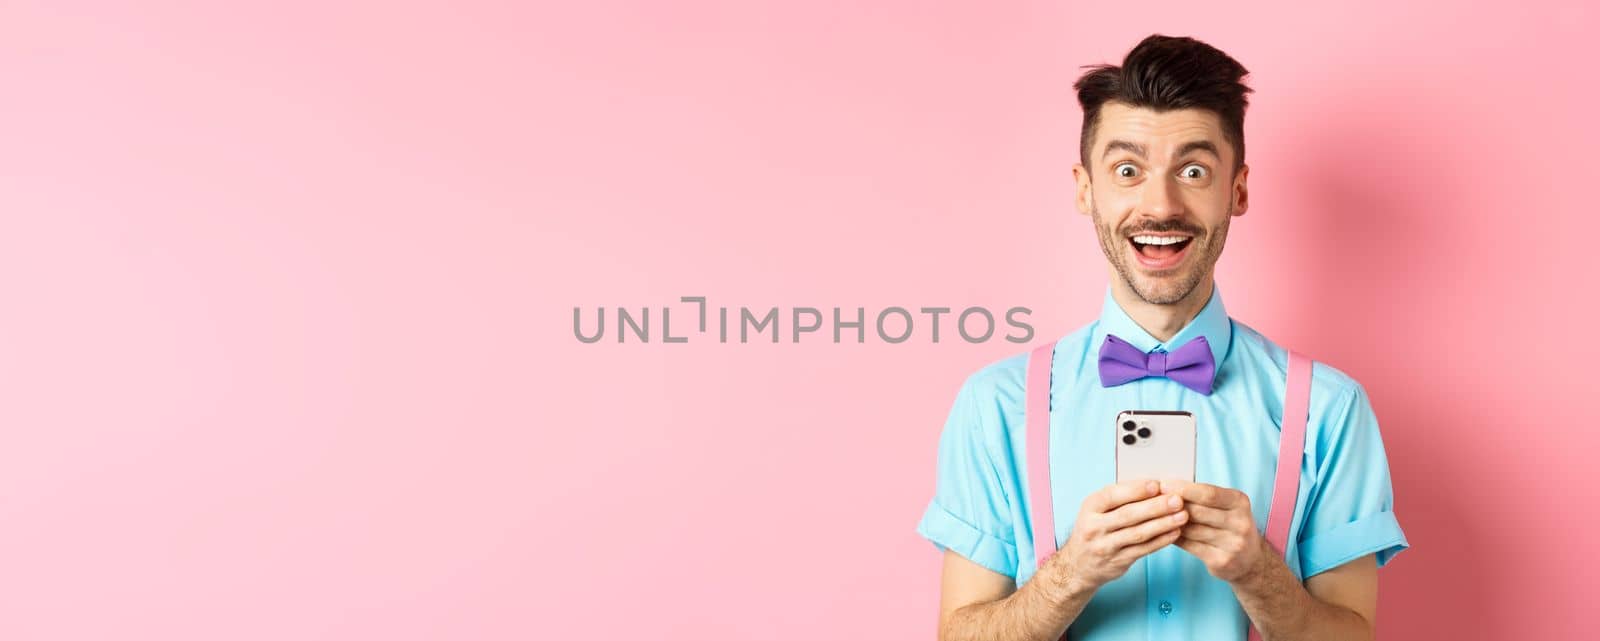 Online shopping. Happy man looking amazed after reading smartphone screen, smiling excited at camera, standing over pink background.